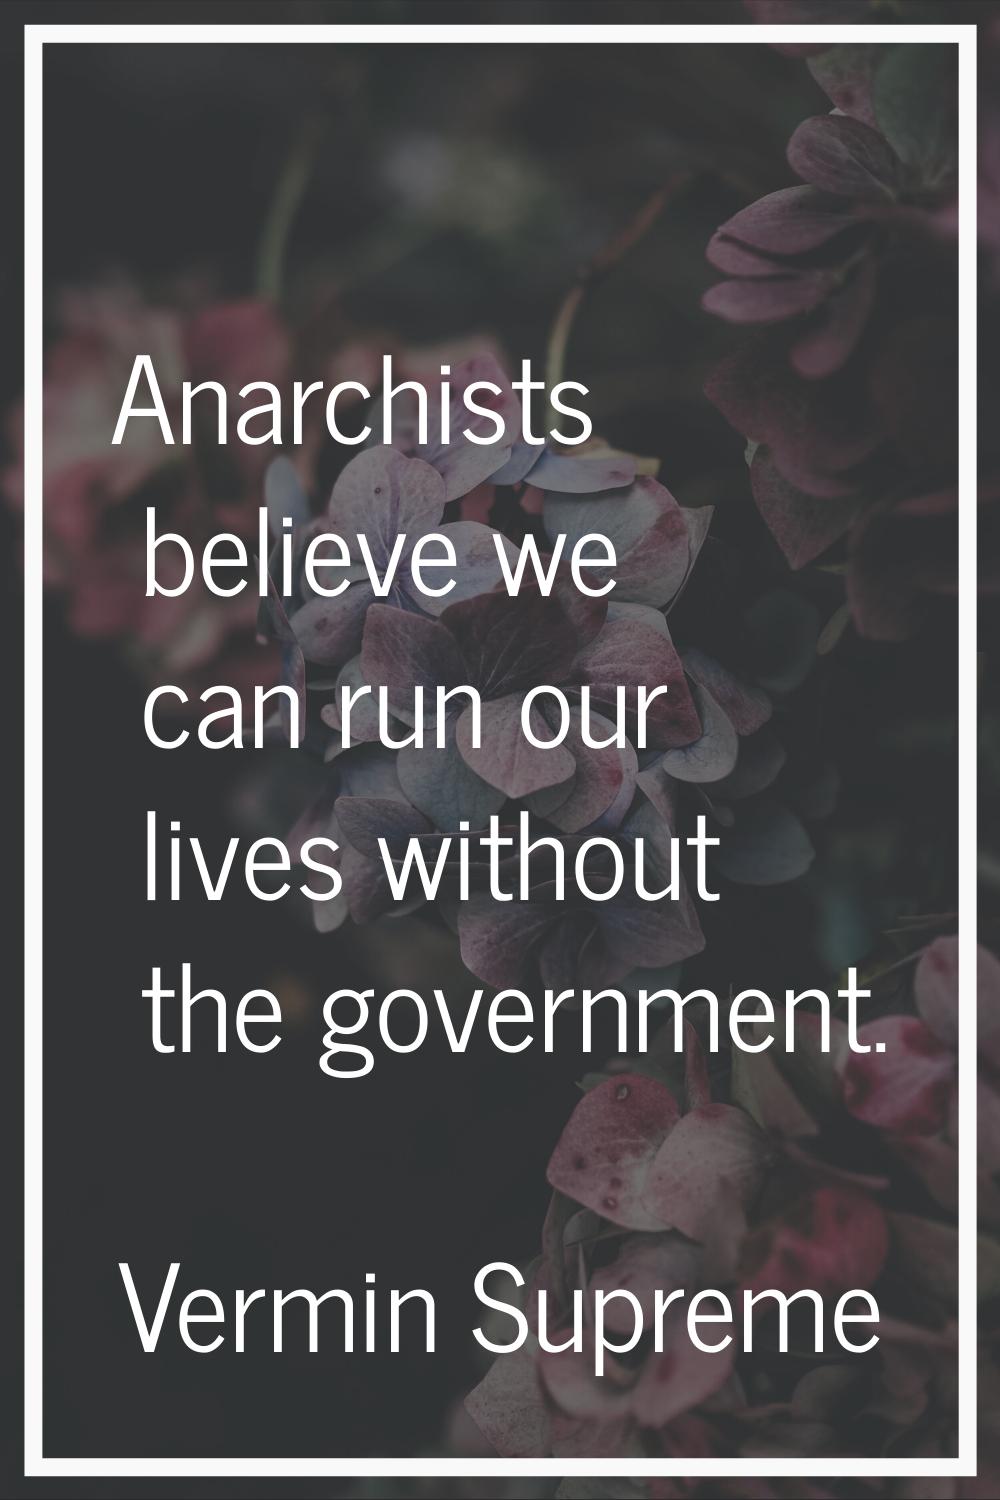 Anarchists believe we can run our lives without the government.